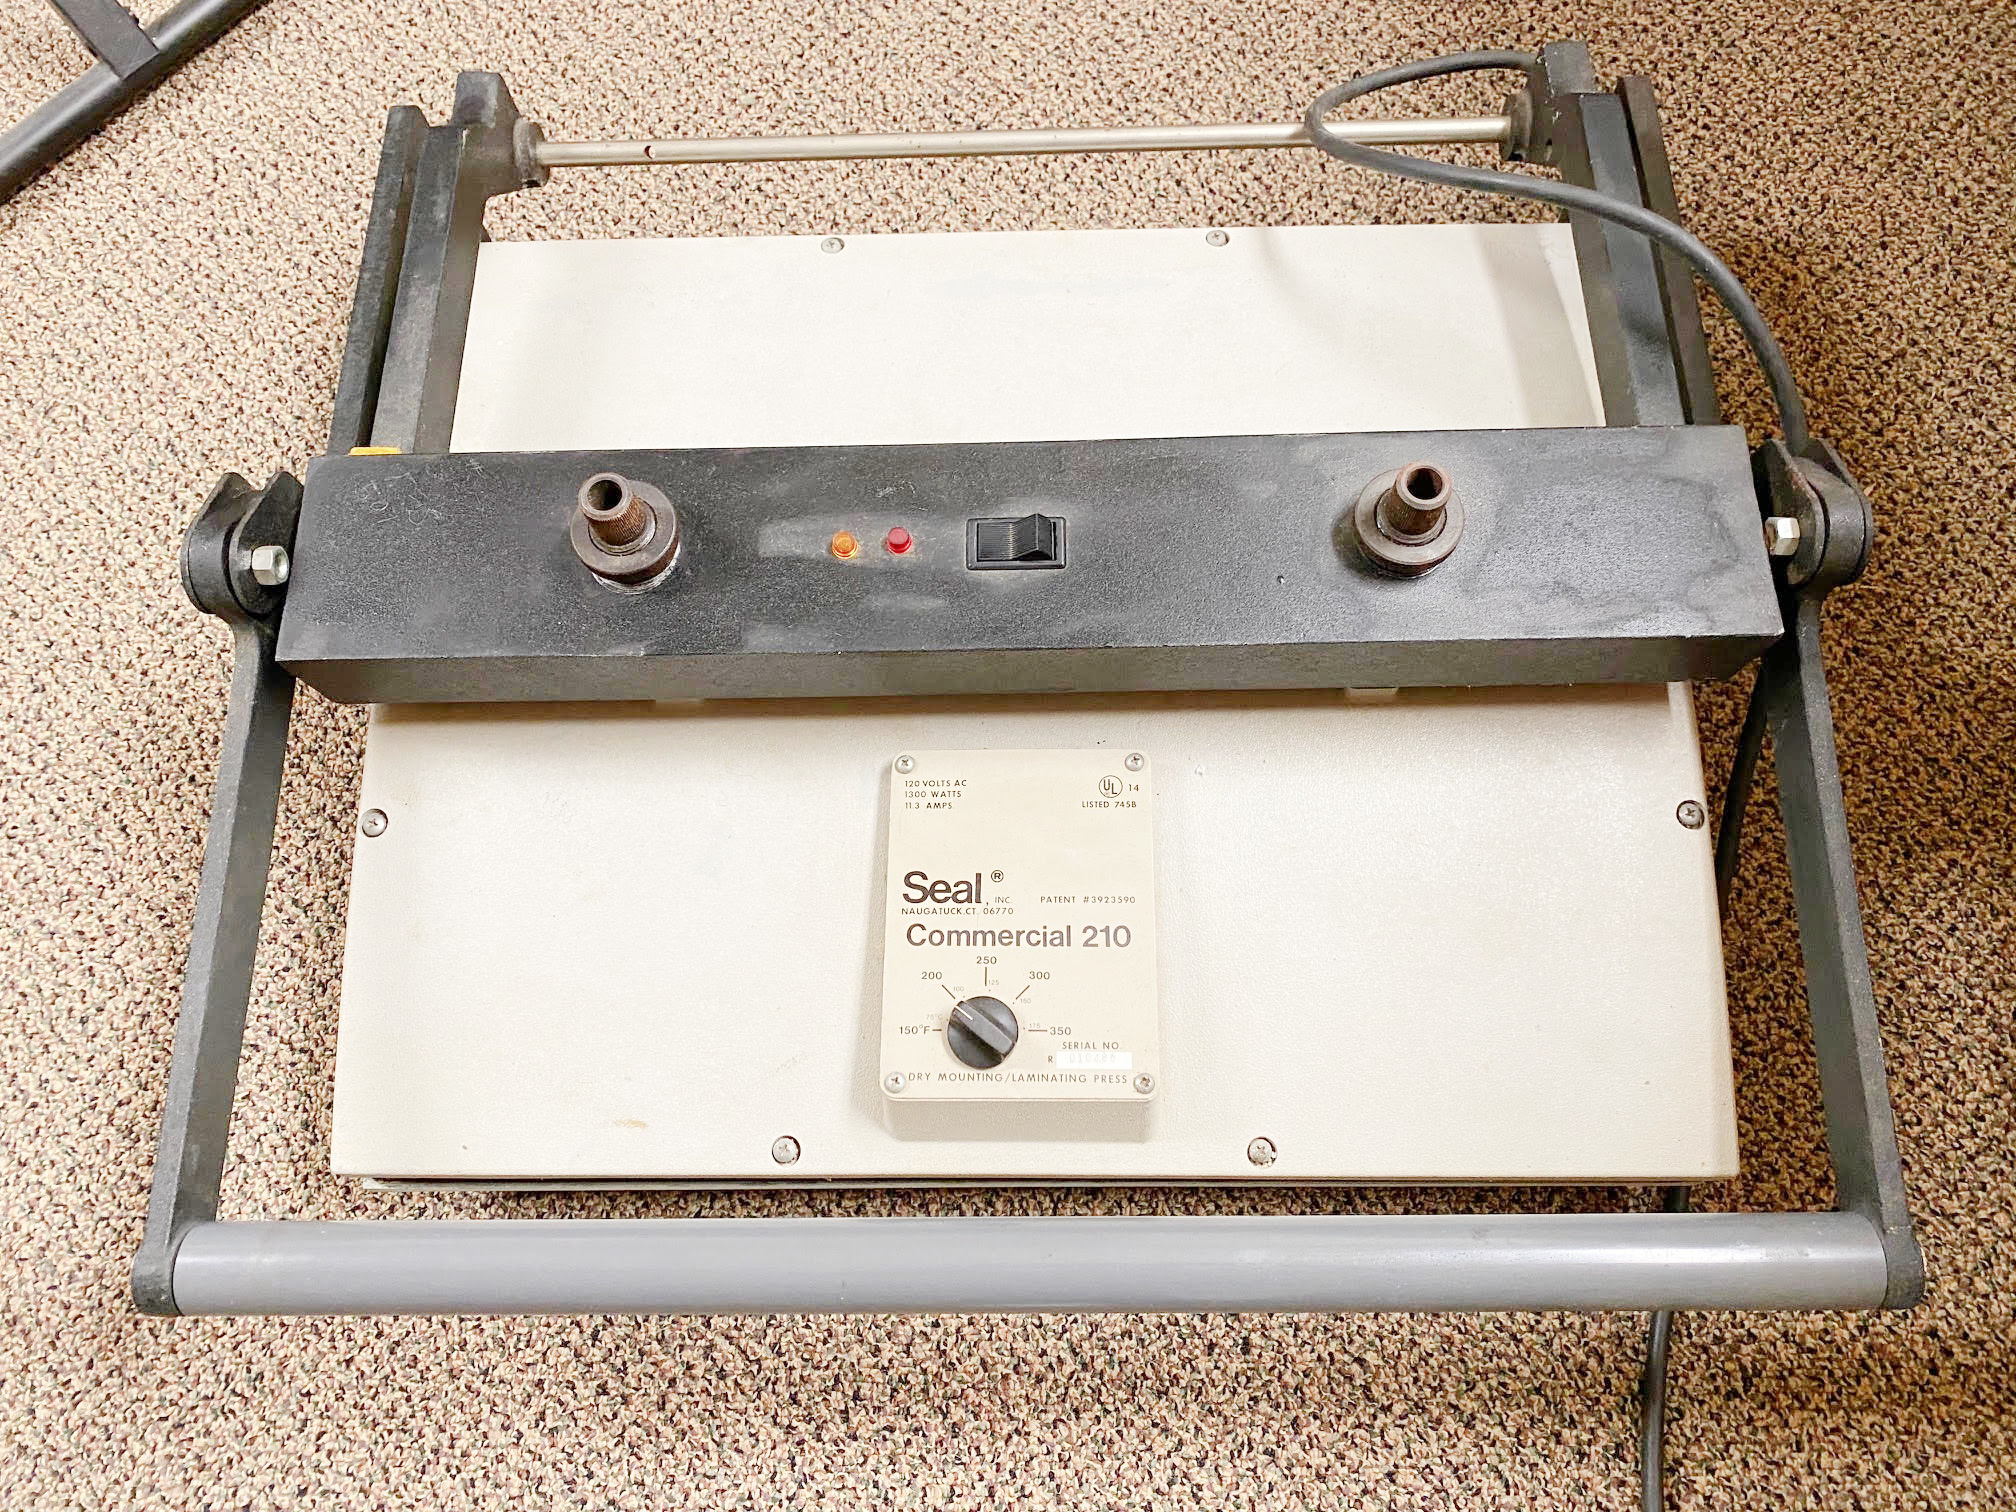 Picture Framing Equipment Lot: Phaedra Miter Grids, ITW AMP Disc Sander, Seal 210 Press  (used) Item # UE-061220B (Tennessee)